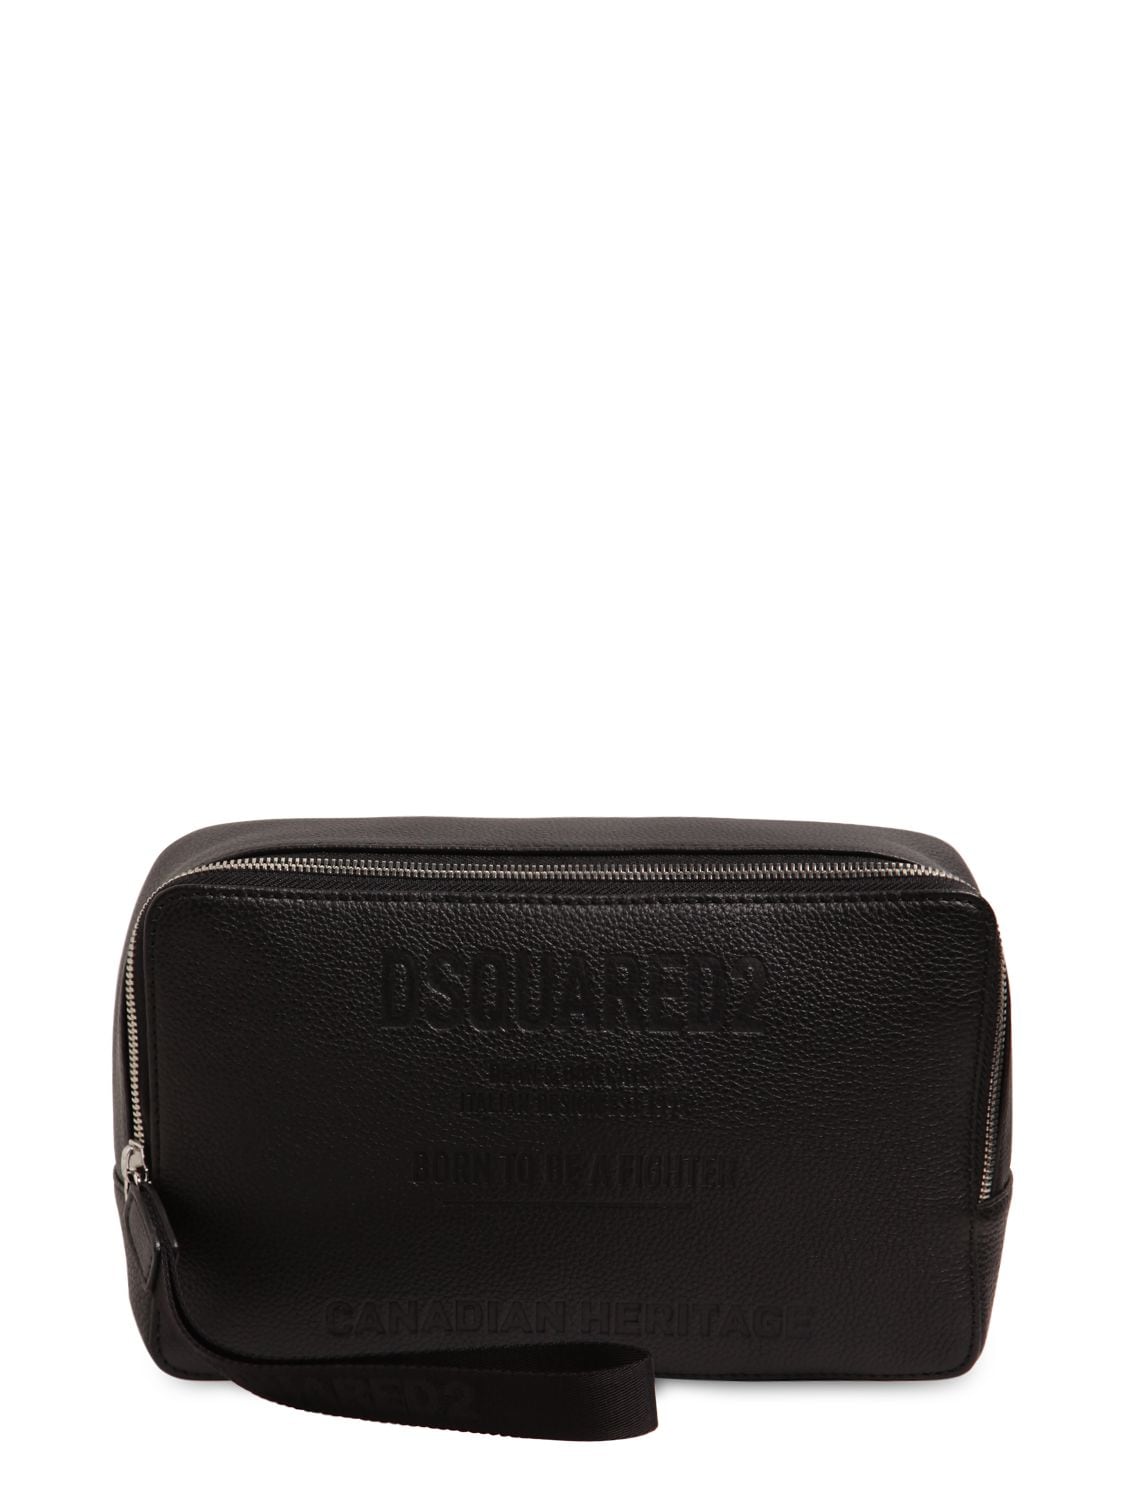 Dsquared2 Embossed Leather Toiletry Bag In Black